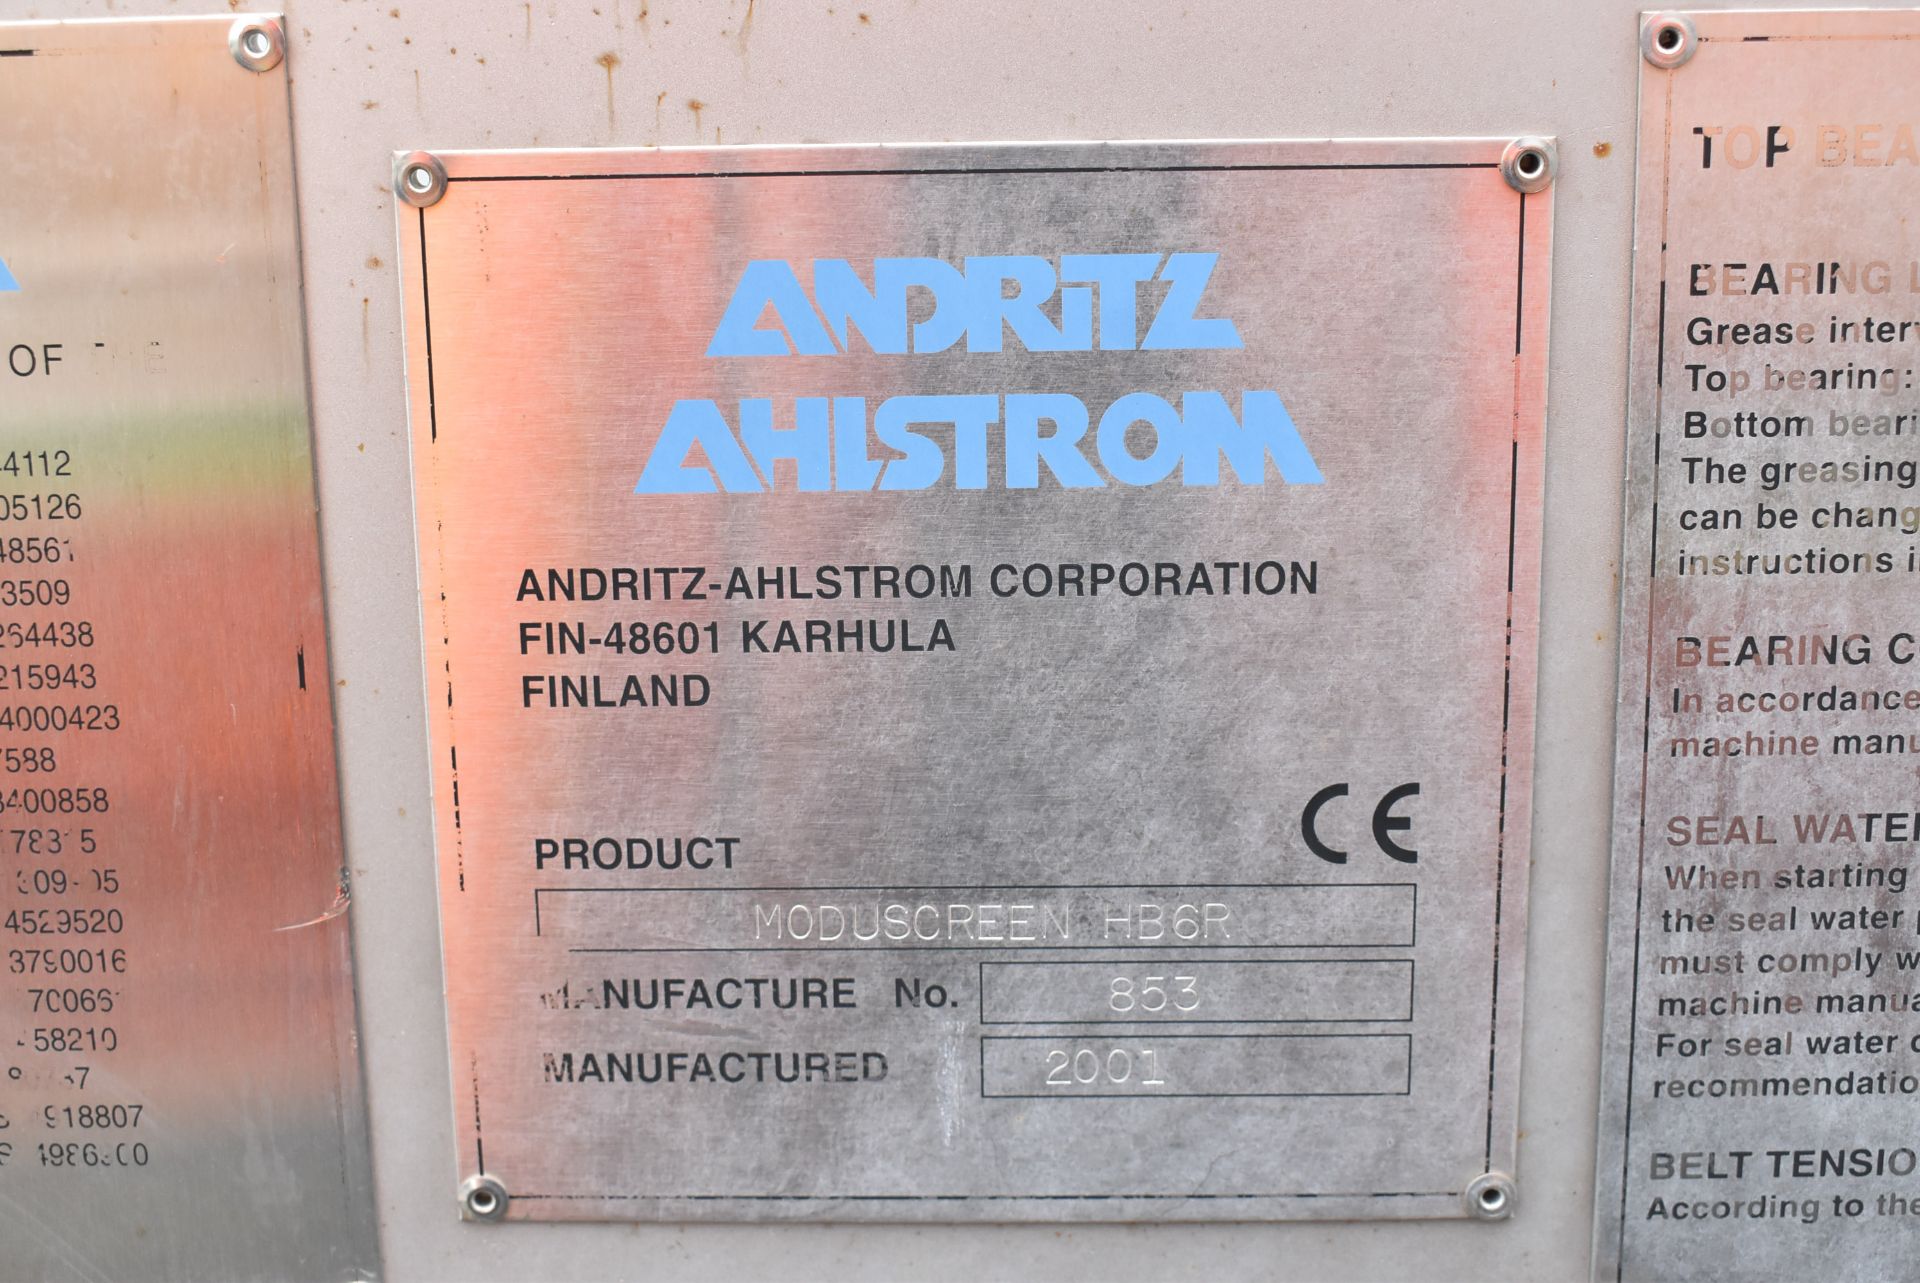 ANDRITZ AHLSTROM MODUSCREEN HB6R HIGH PRESSURE STAINLESS STEEL FINE SCREENING UNIT WITH 90" DIA. X - Image 4 of 4